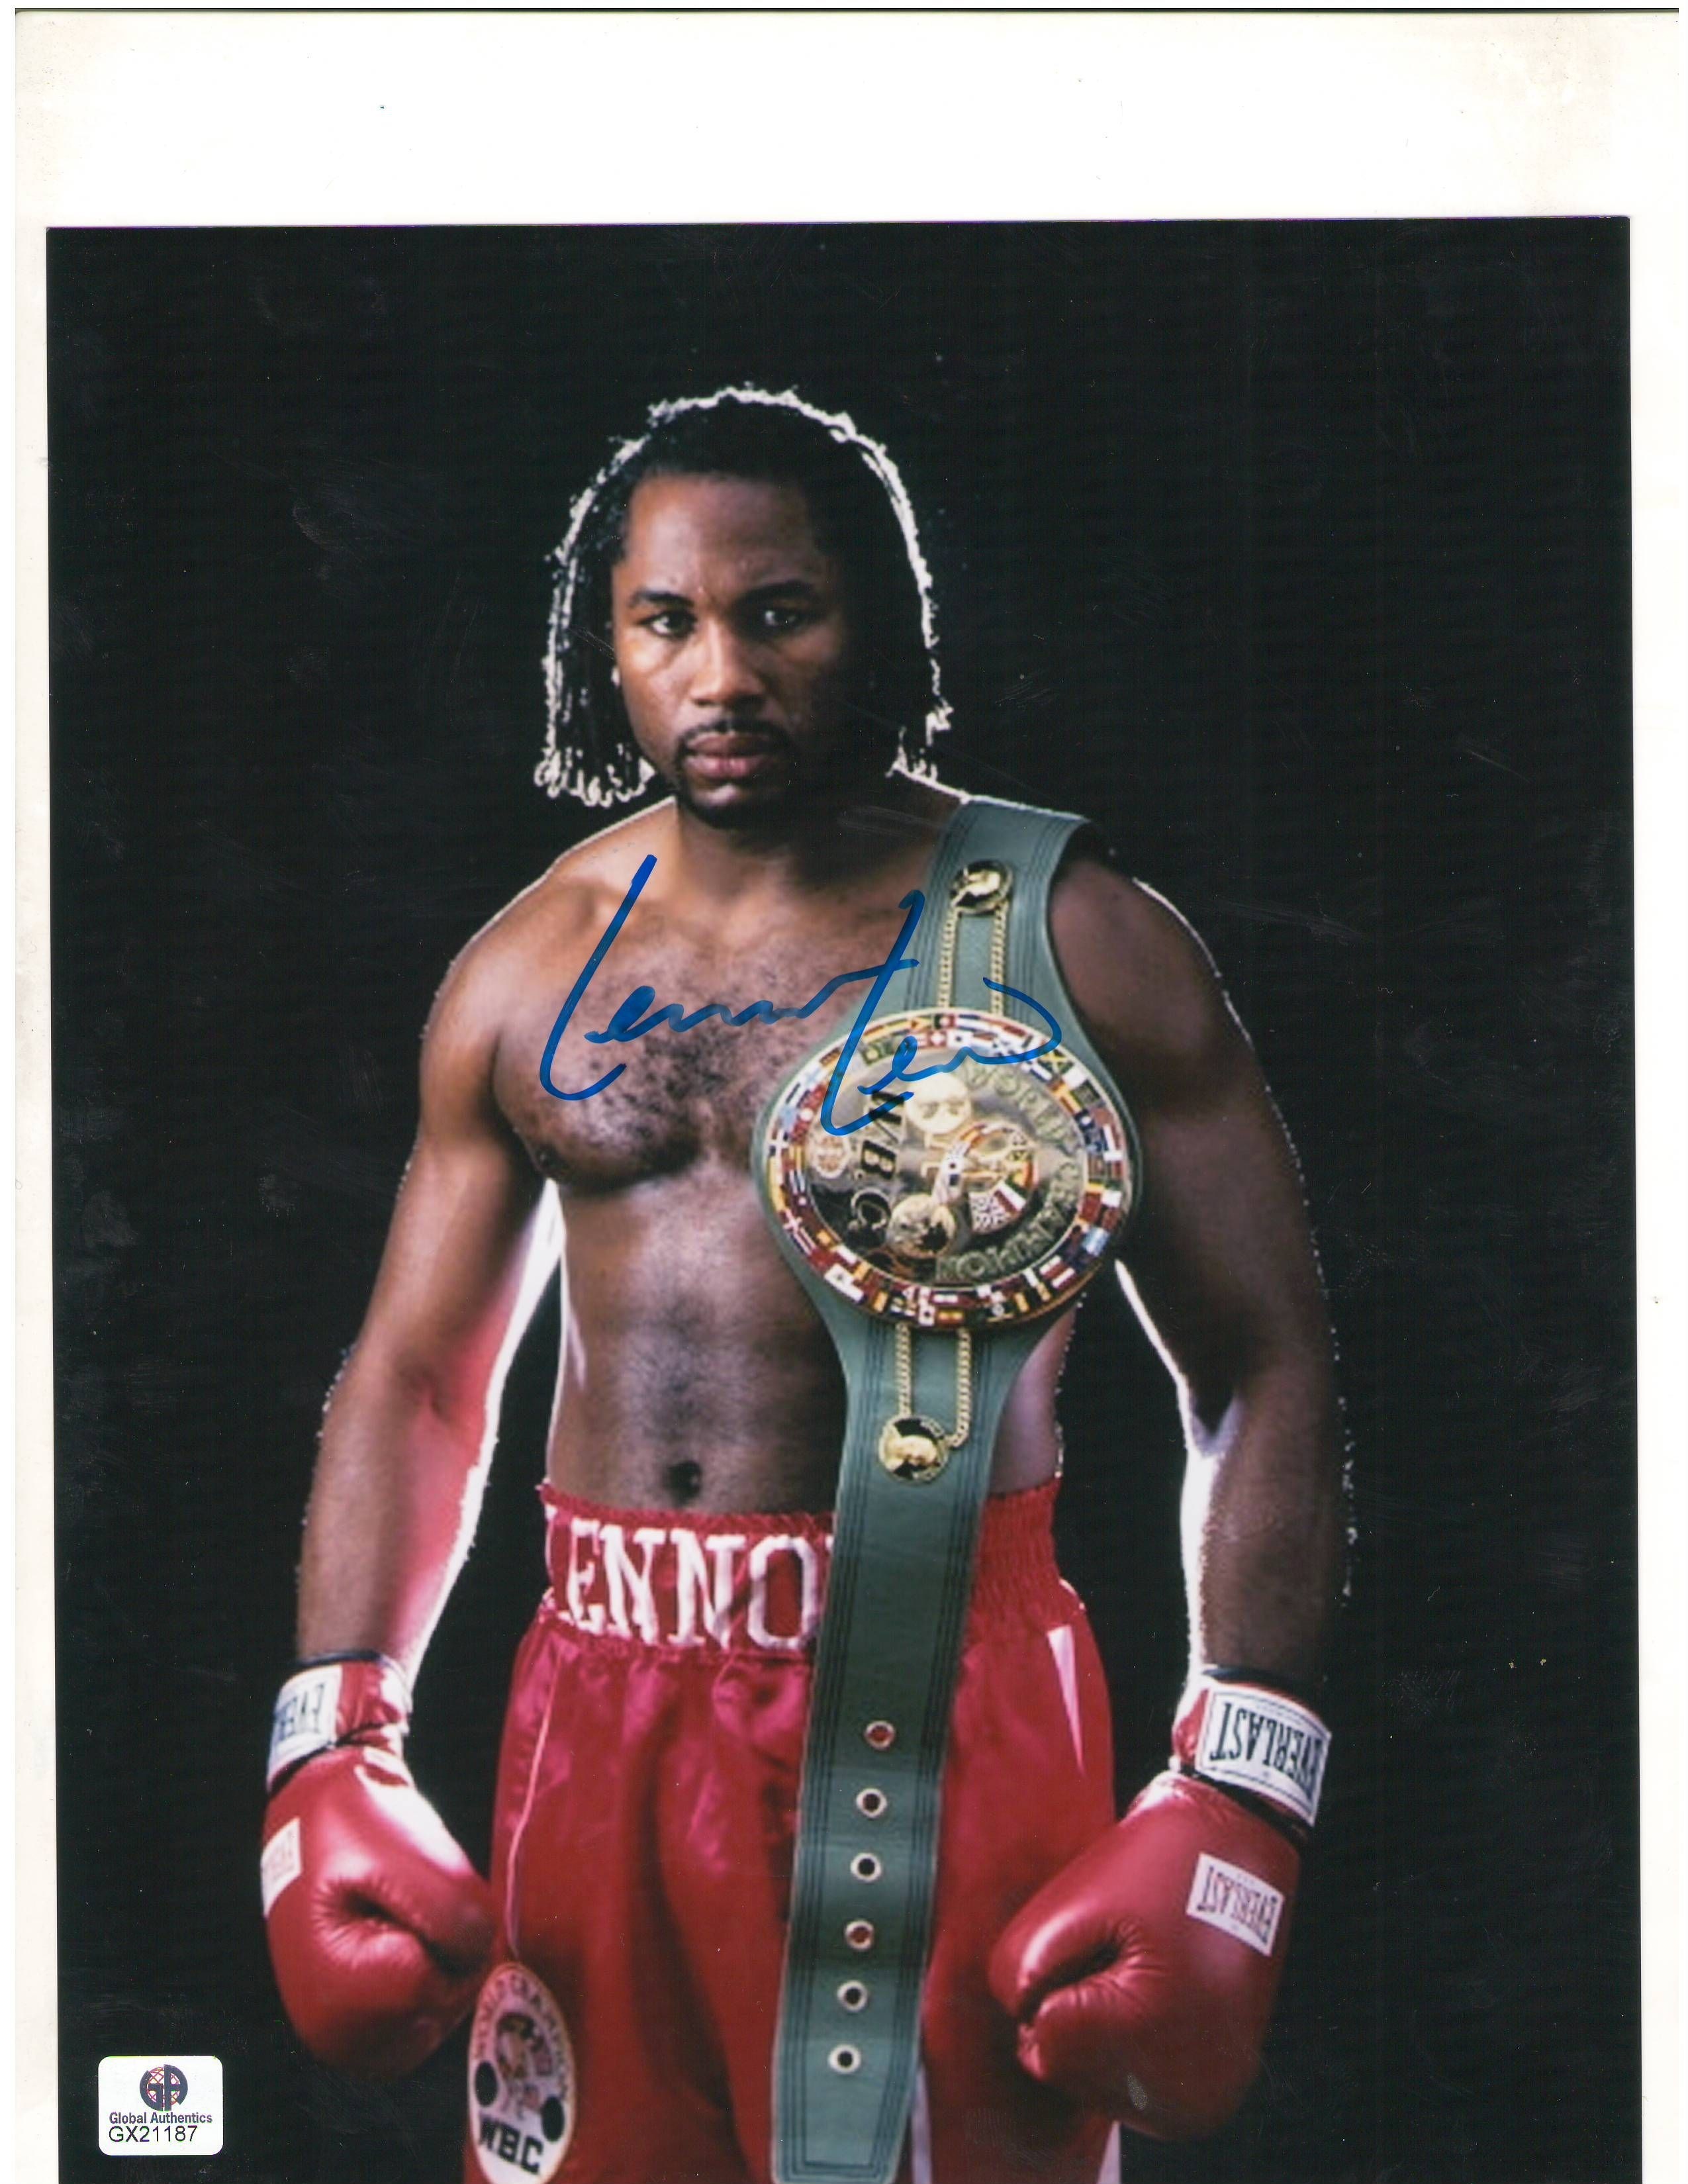 Lennox Lewis Known People Famous News And